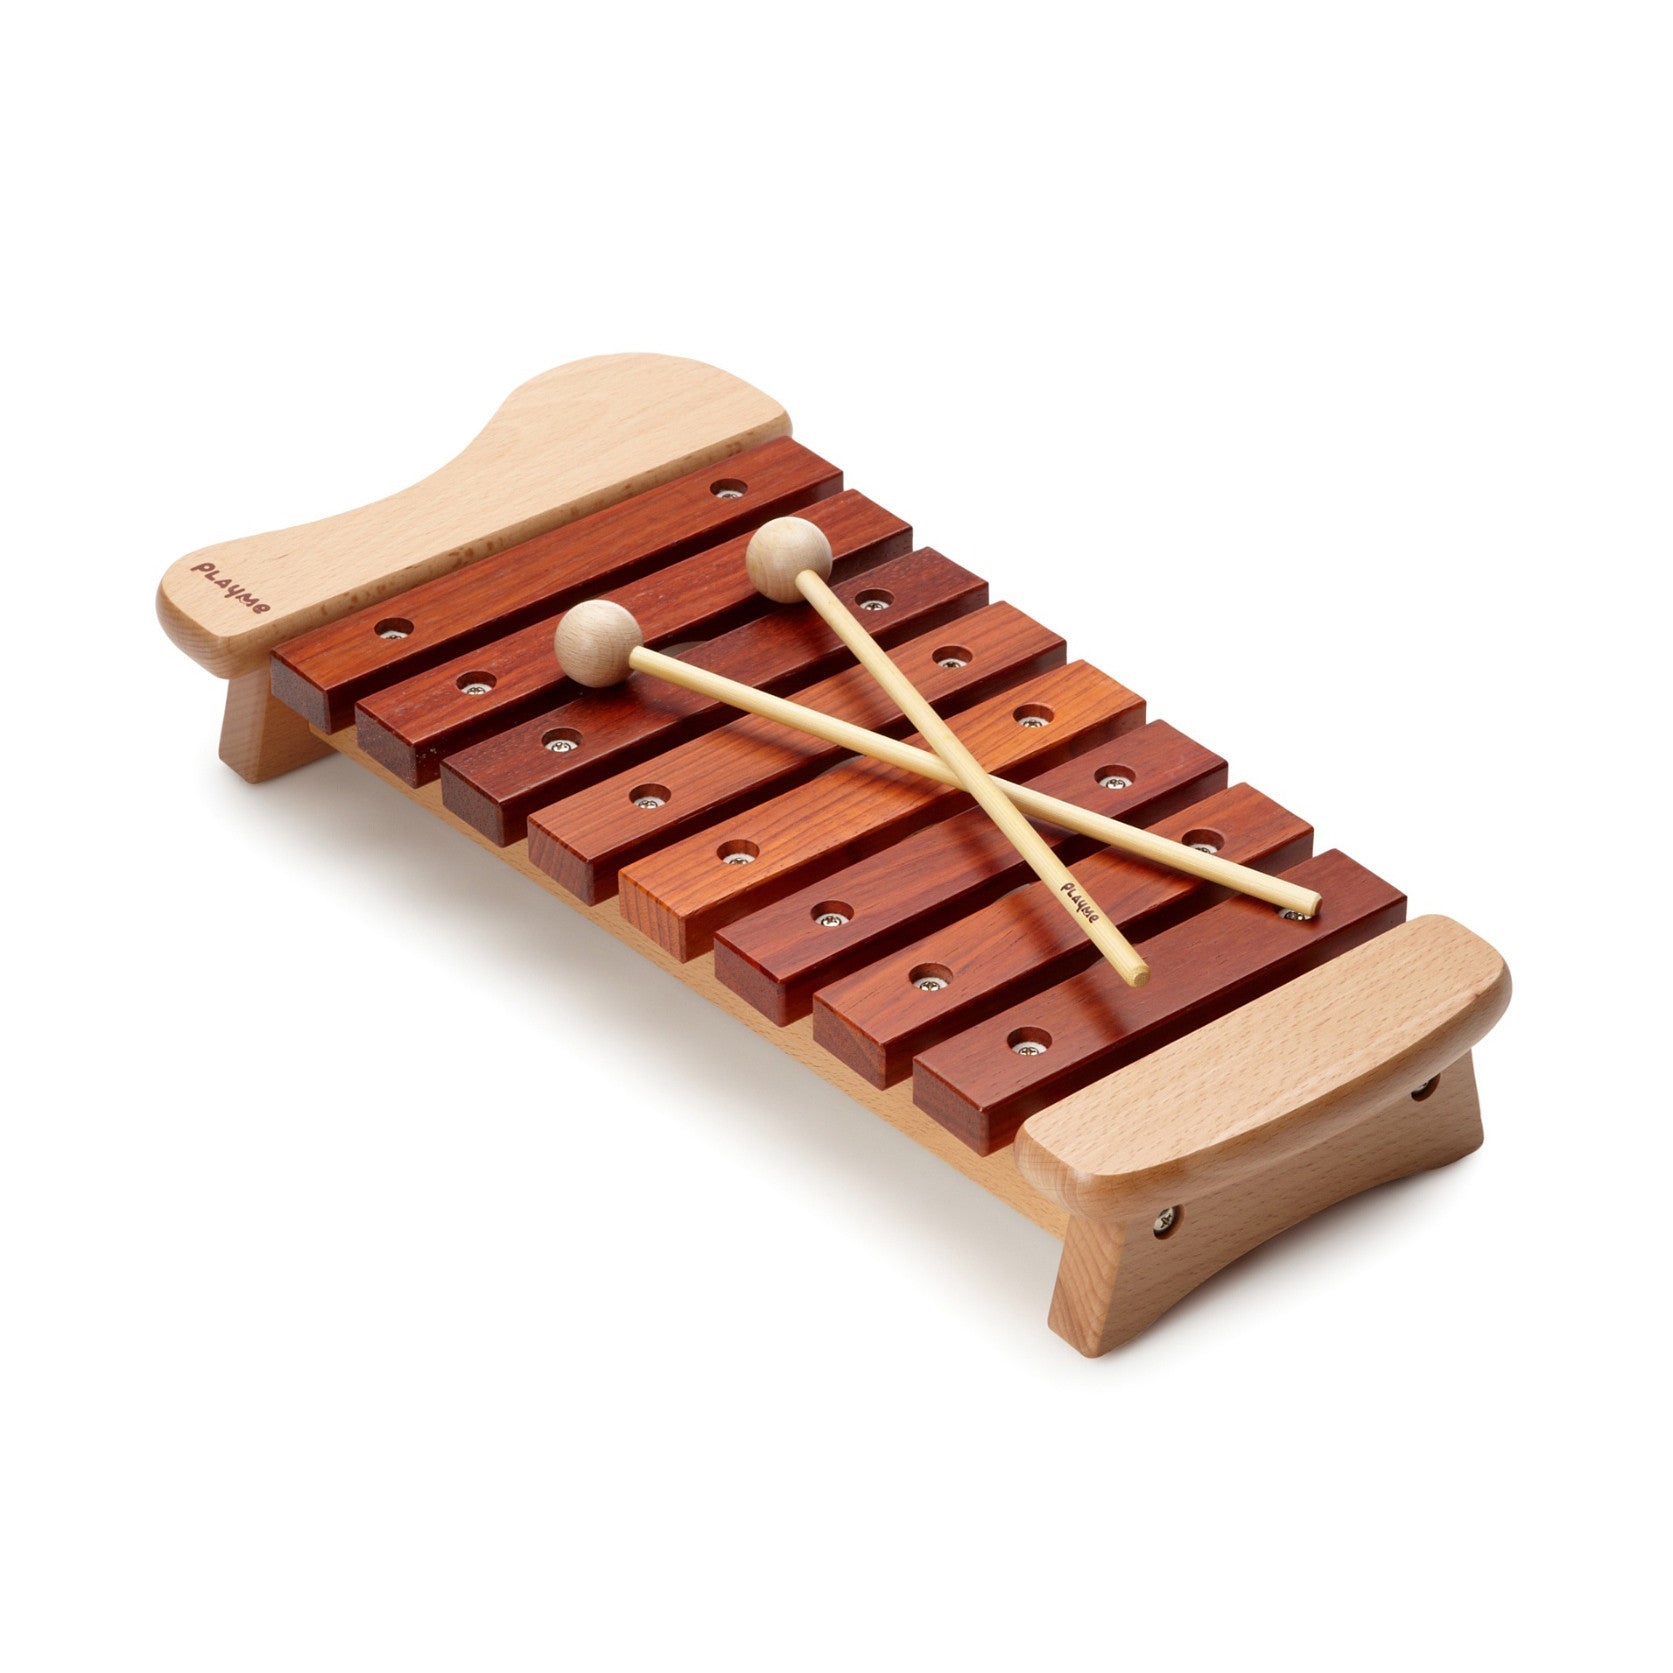 Xylophone woodworking plans